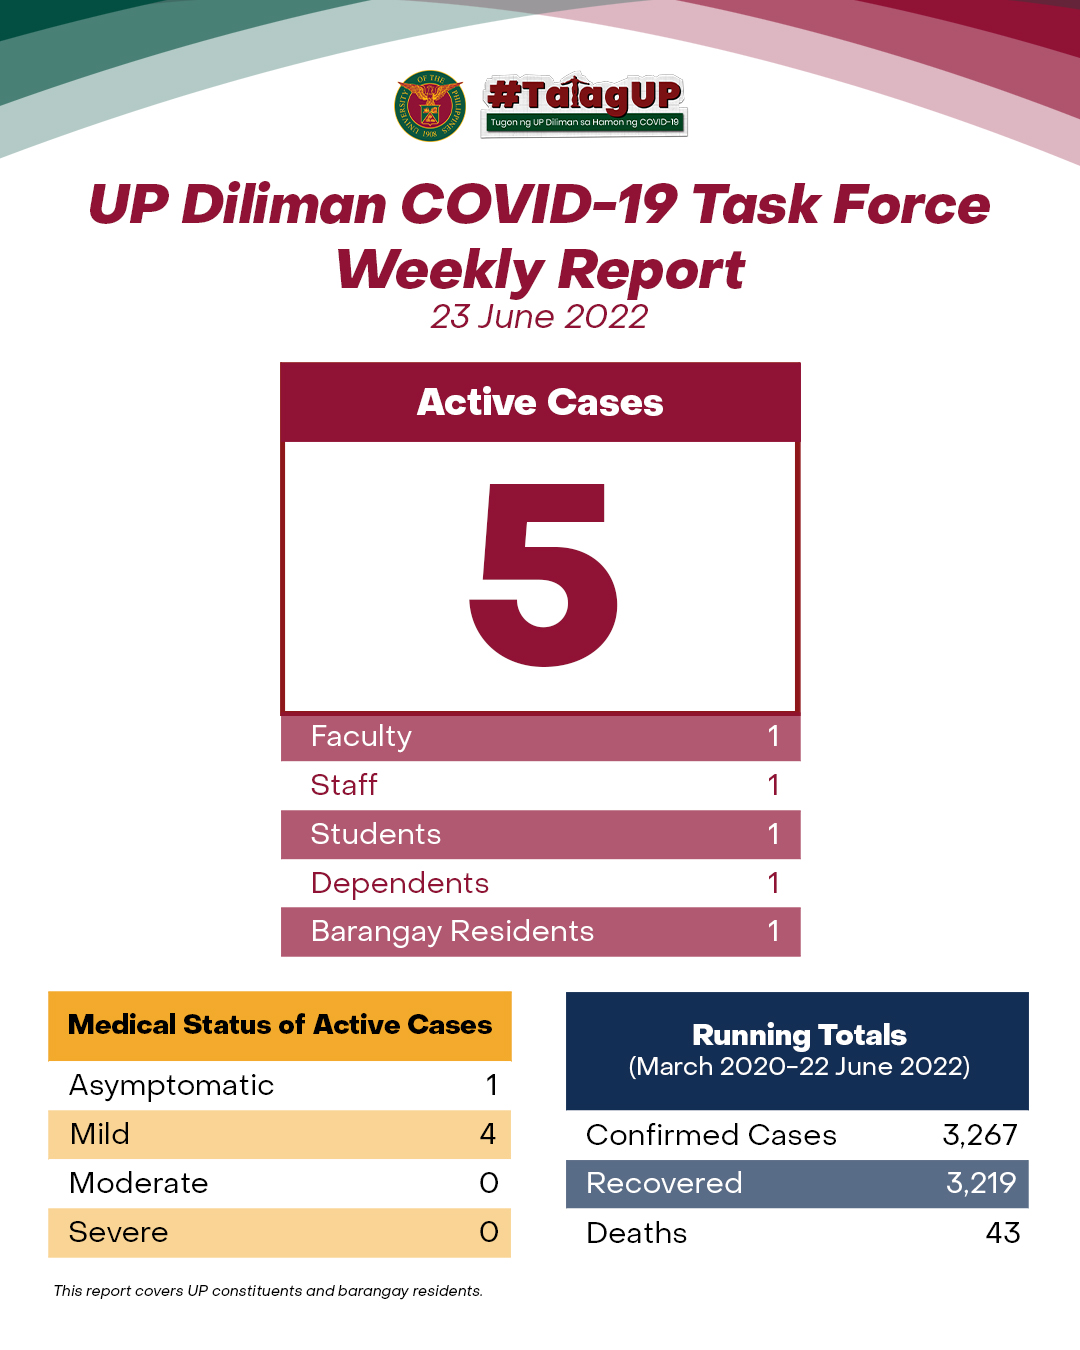 UP Diliman COVID-19 Task Force Weekly Report (23 June 2022)